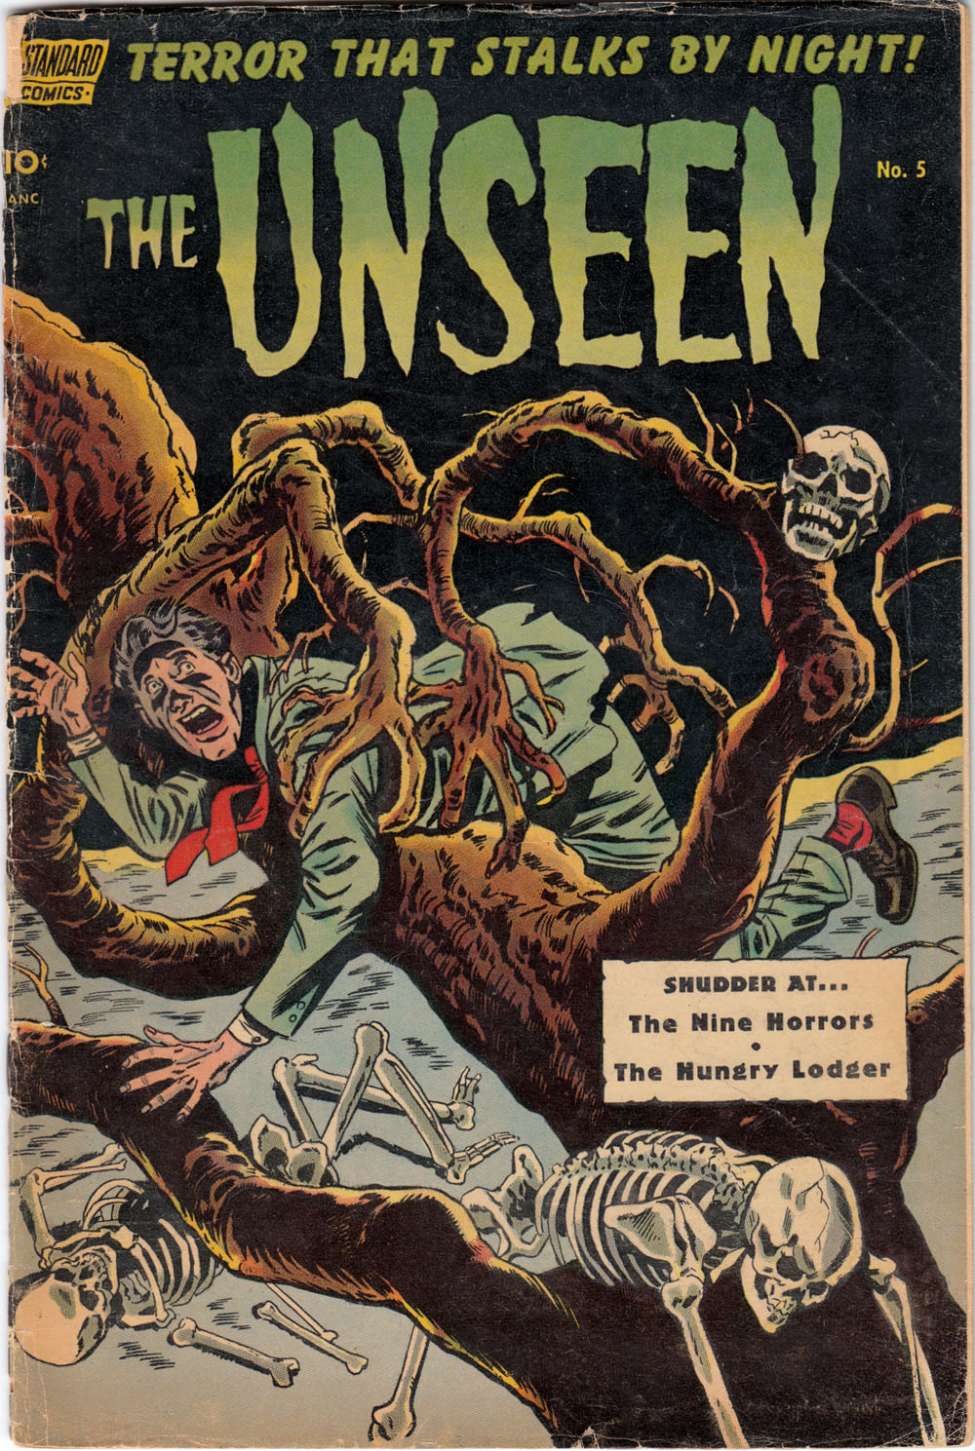 Book Cover For The Unseen 5 - Version 1